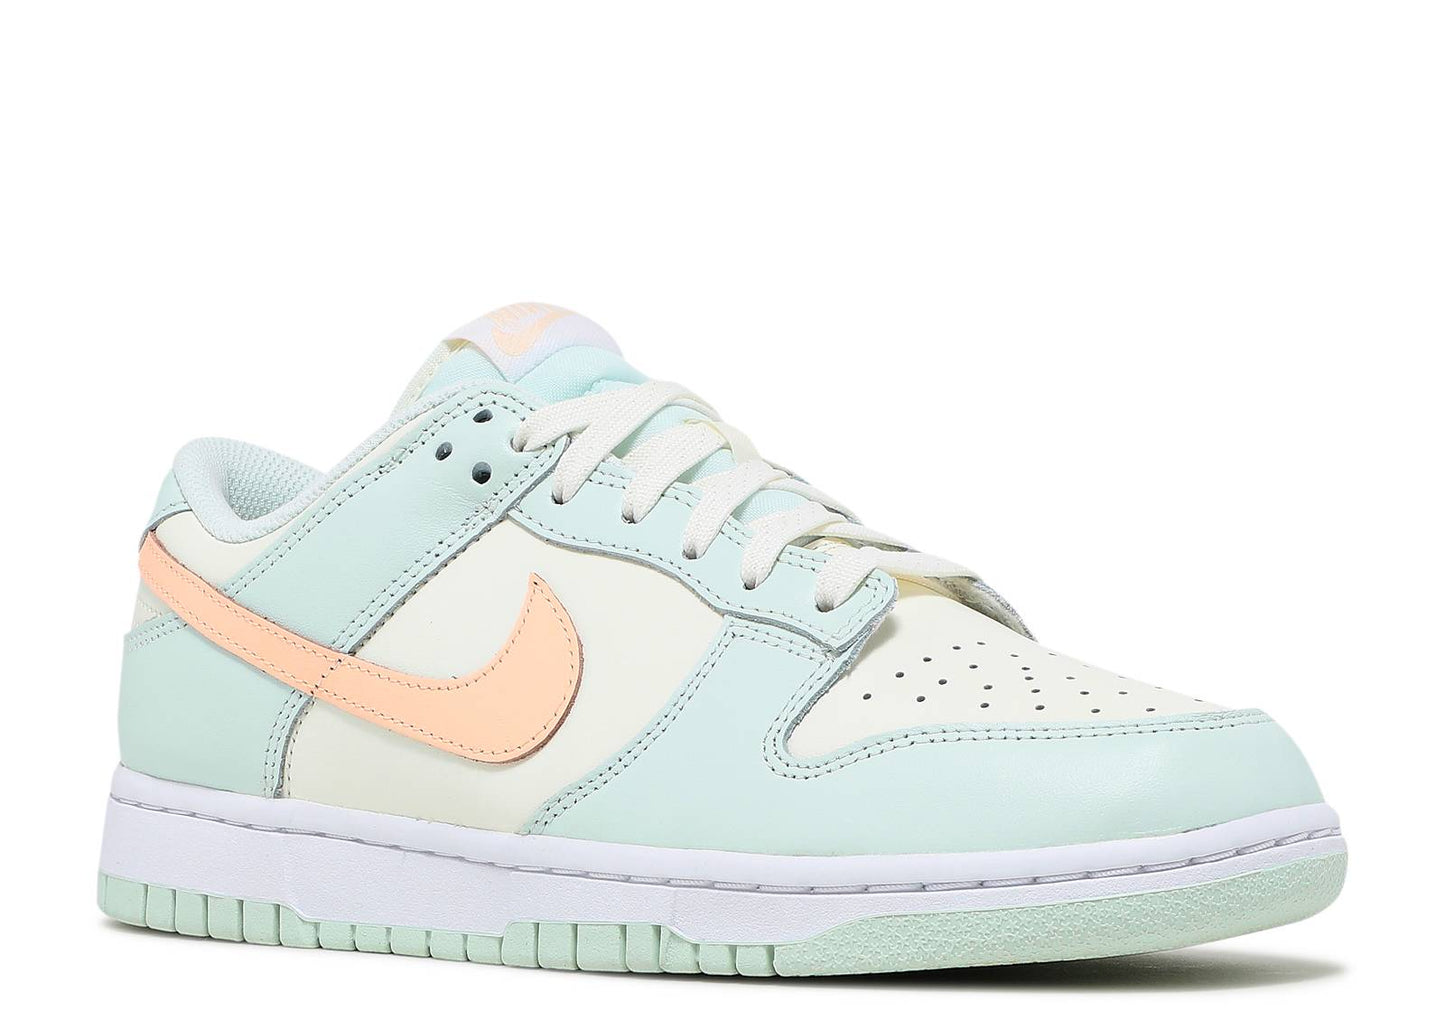 Nike Dunk Low WMNS "Barely Green"